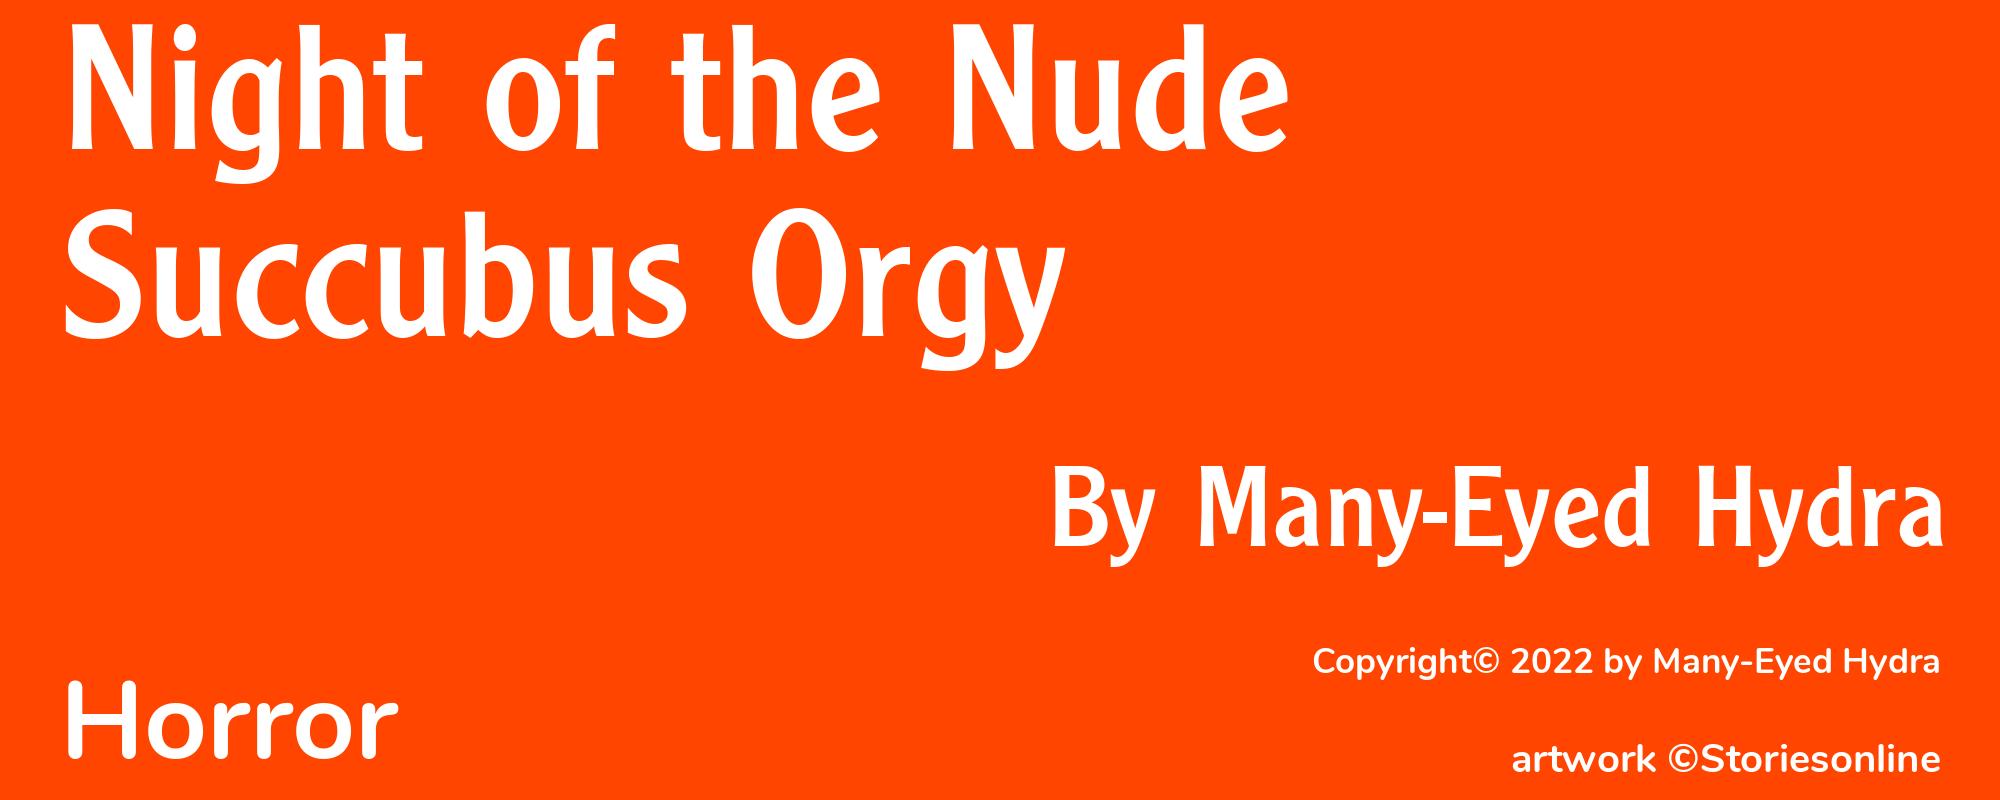 Night of the Nude Succubus Orgy - Cover